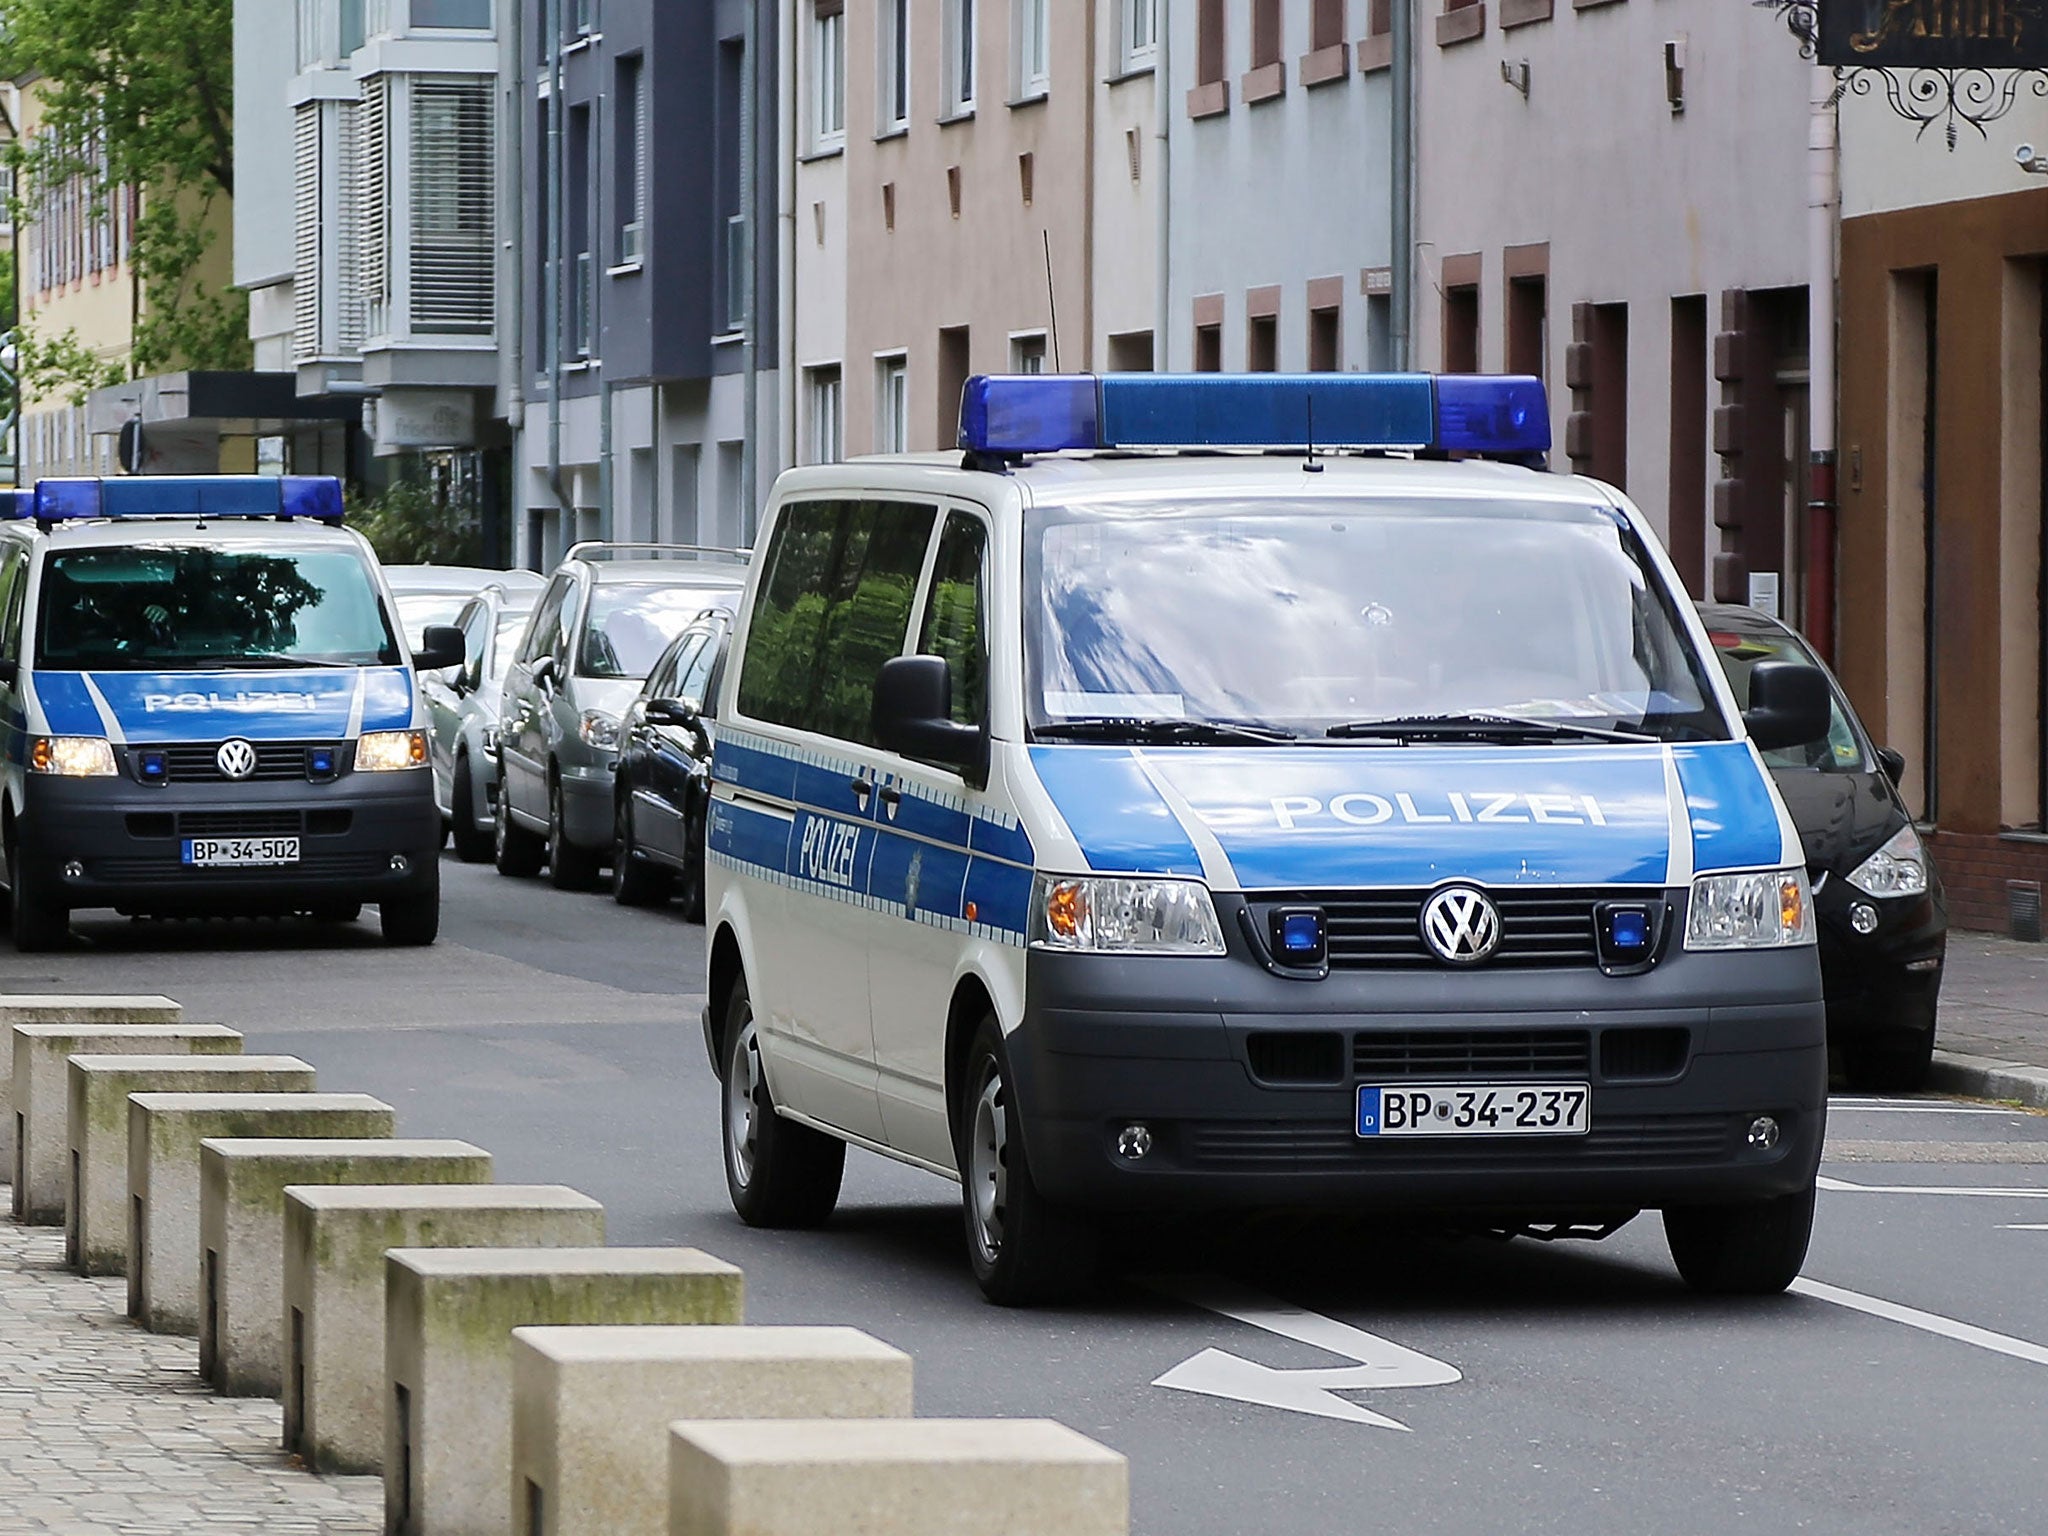 Four people arrested in Germany over planned terror attack on Muslims ...